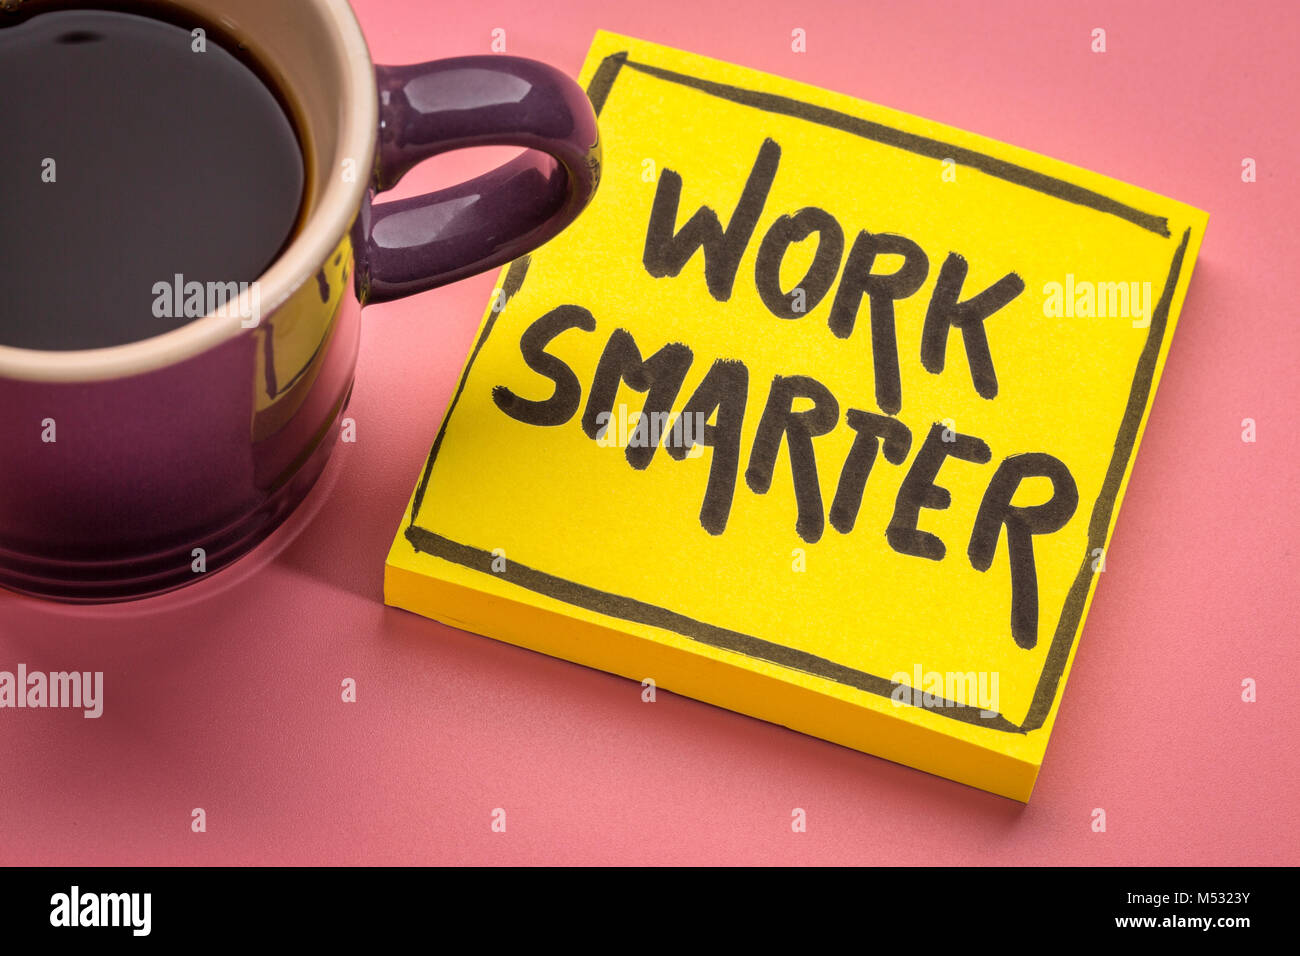 work smarter inspirational advice or reminder - handwriting on a sticky note with a cup of coffee Stock Photo